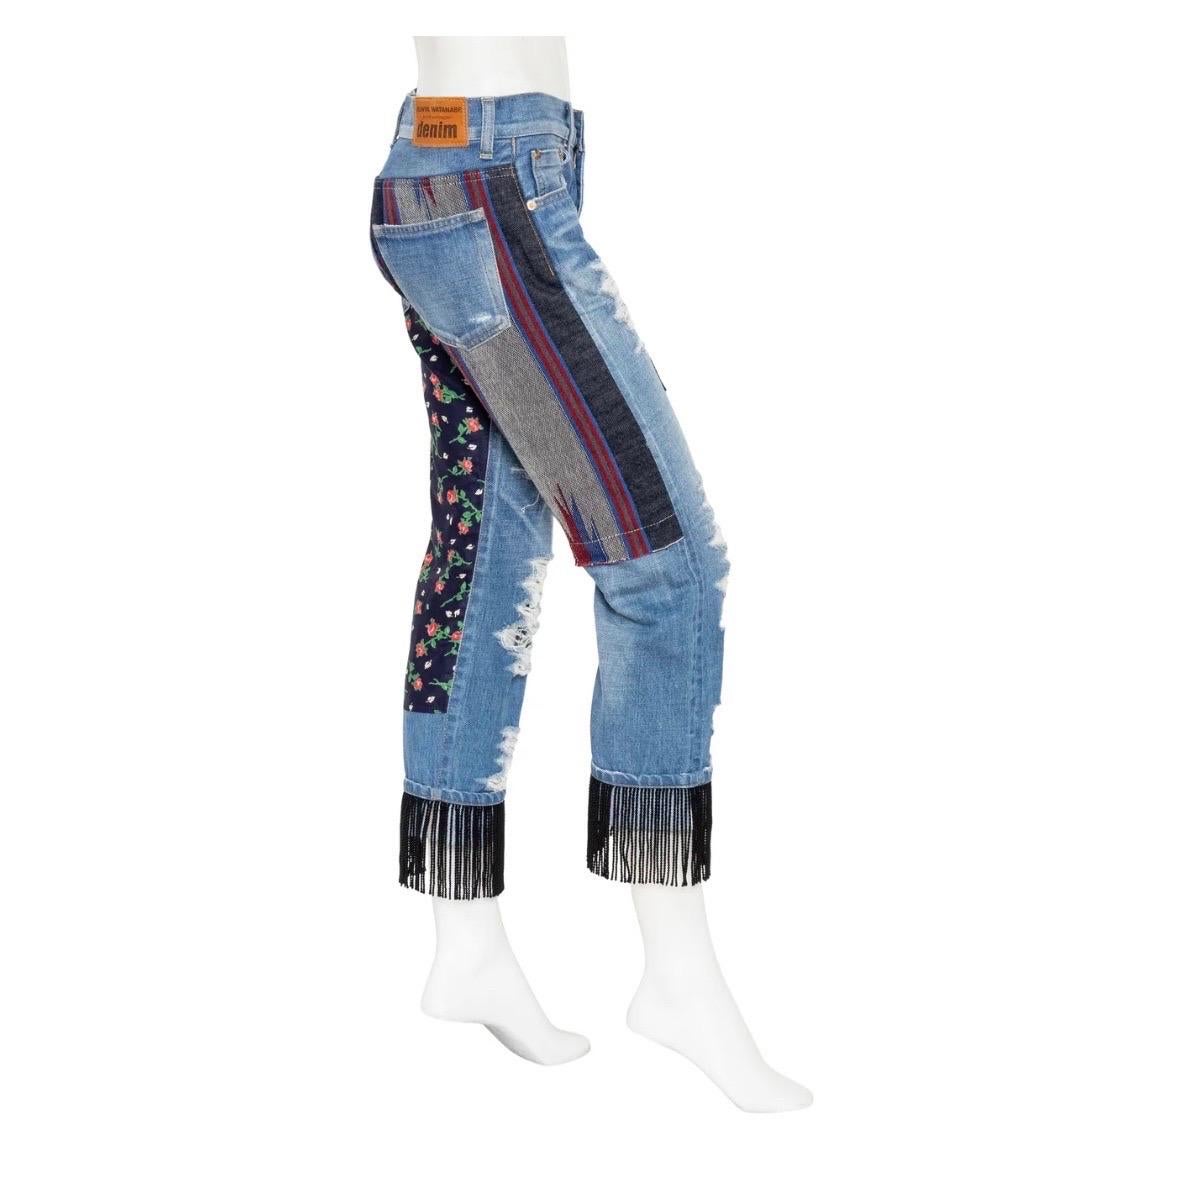 Junya Watanabe Comme des Garçon Fringed Patchwork Jeans 2014 In Excellent Condition For Sale In Los Angeles, CA